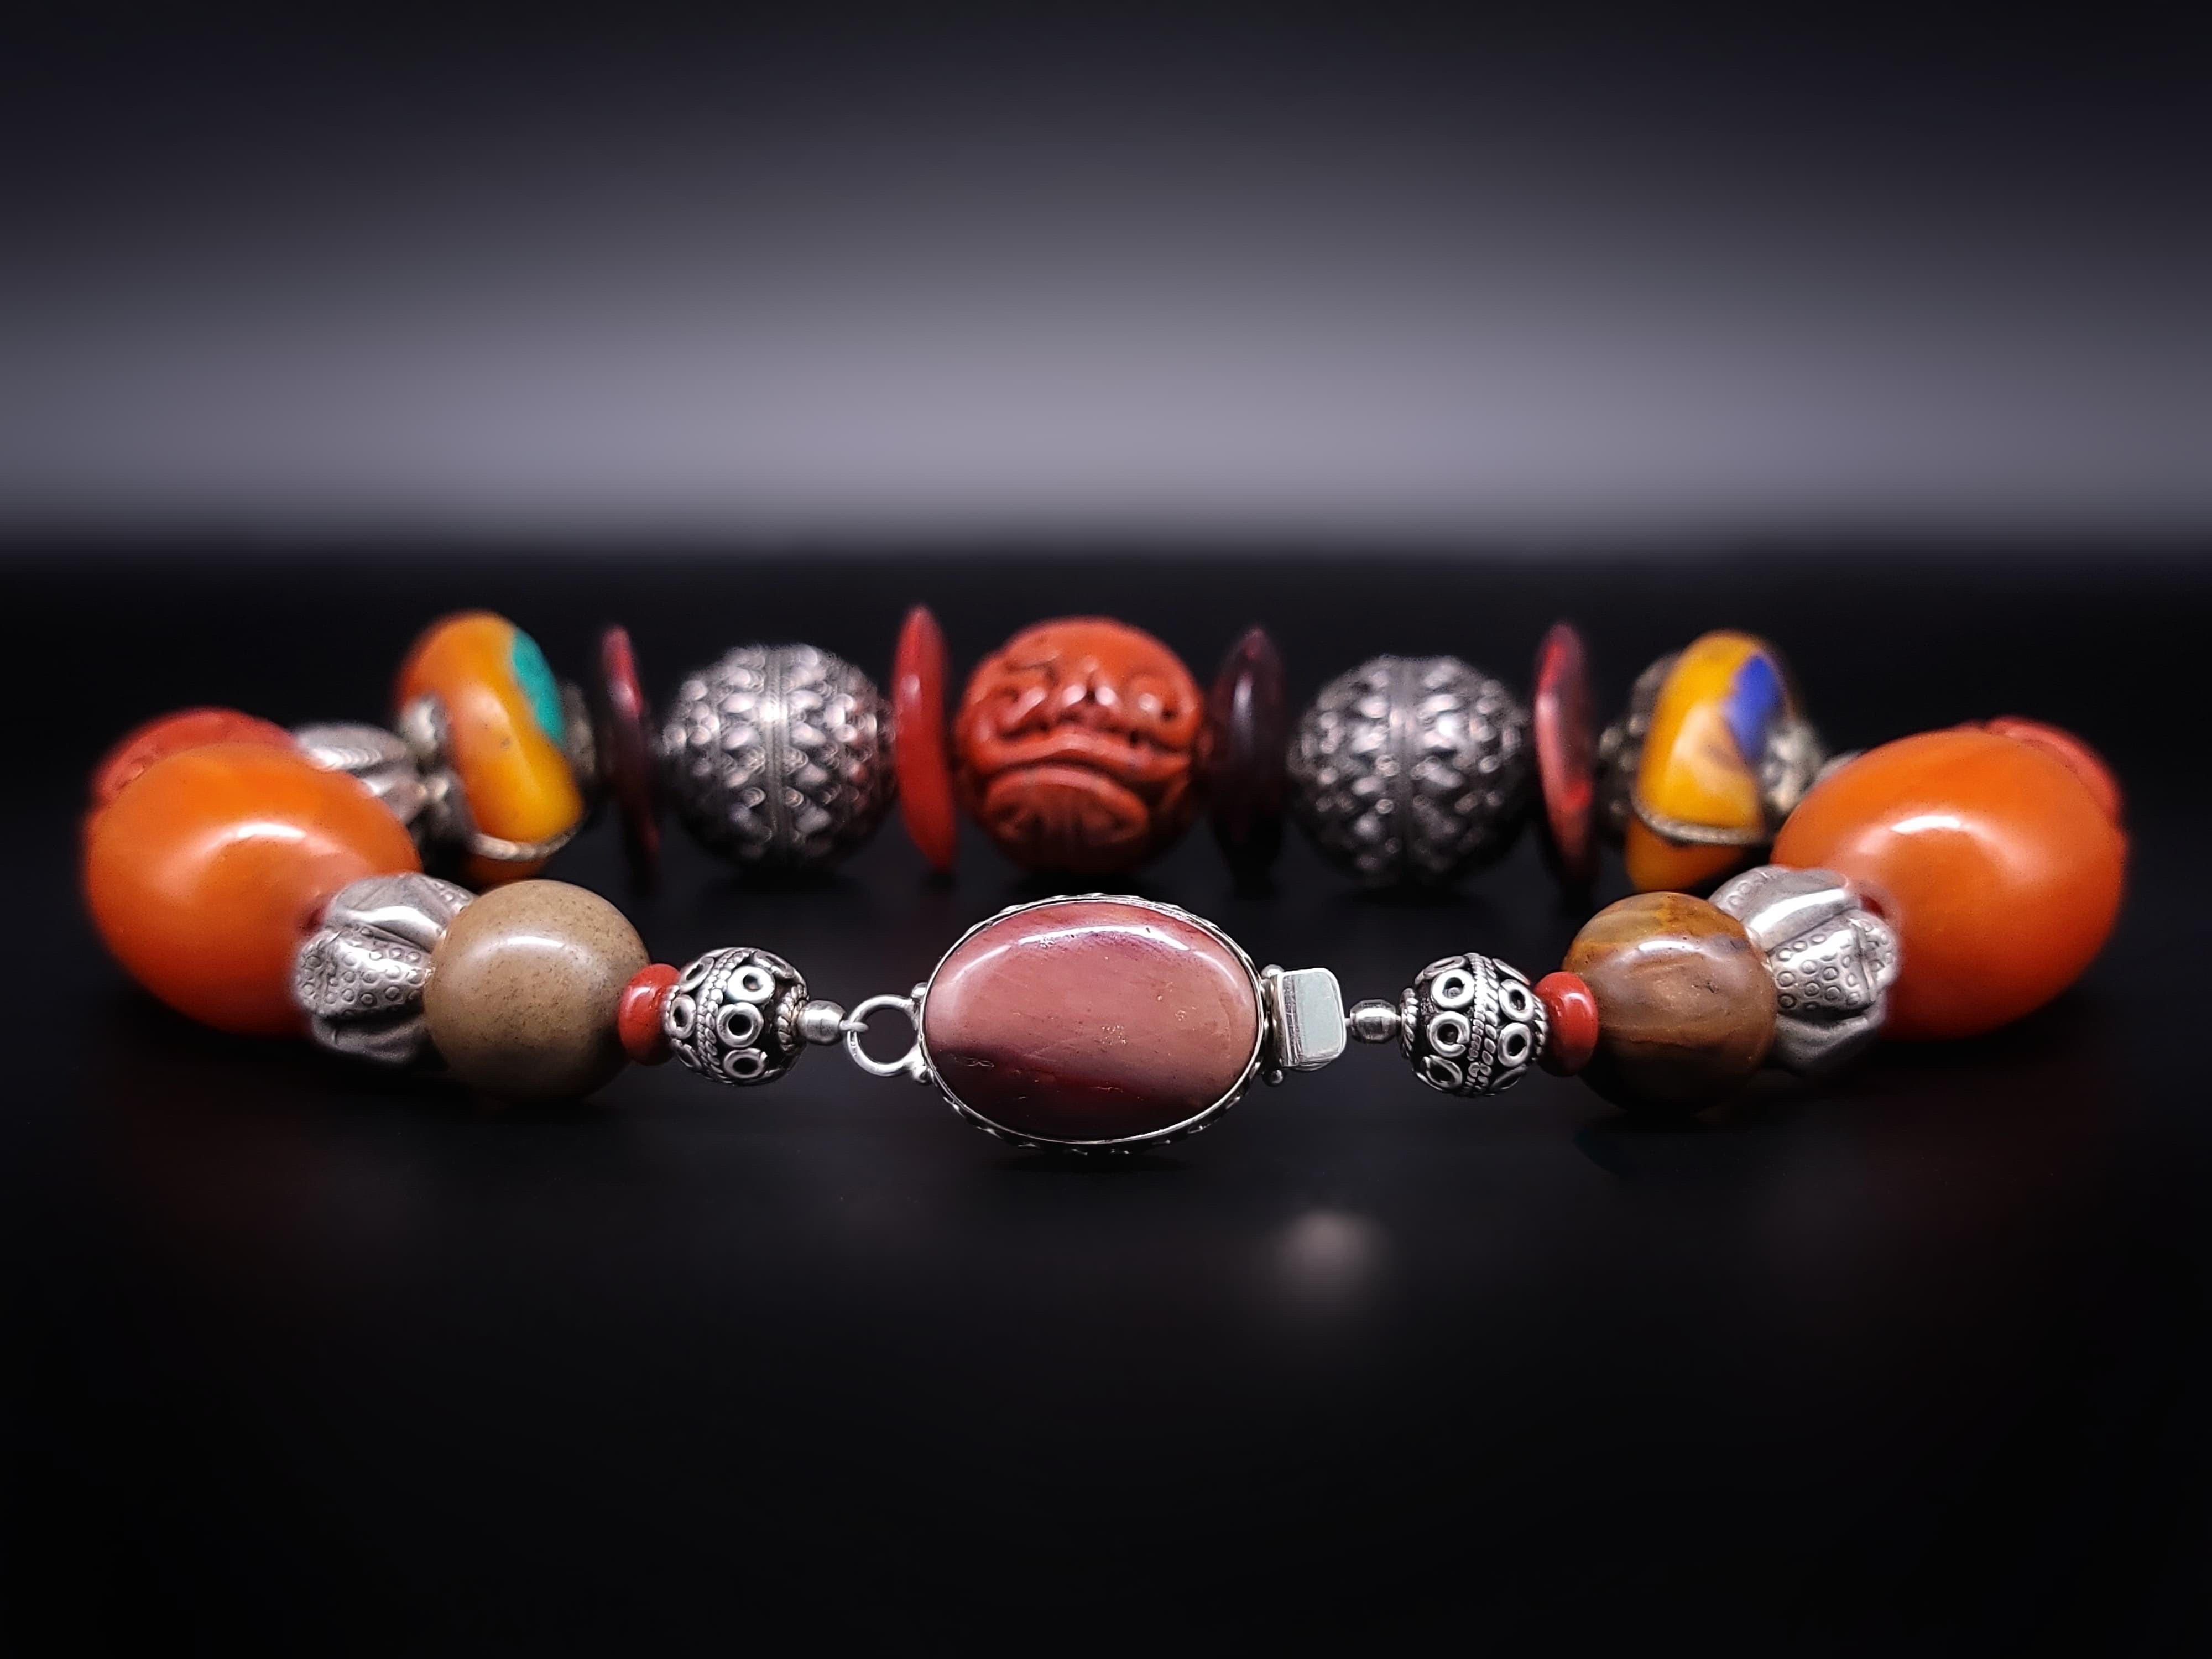 A.Jeschel Tibetan Amber necklace with Carved Ceramic. 11